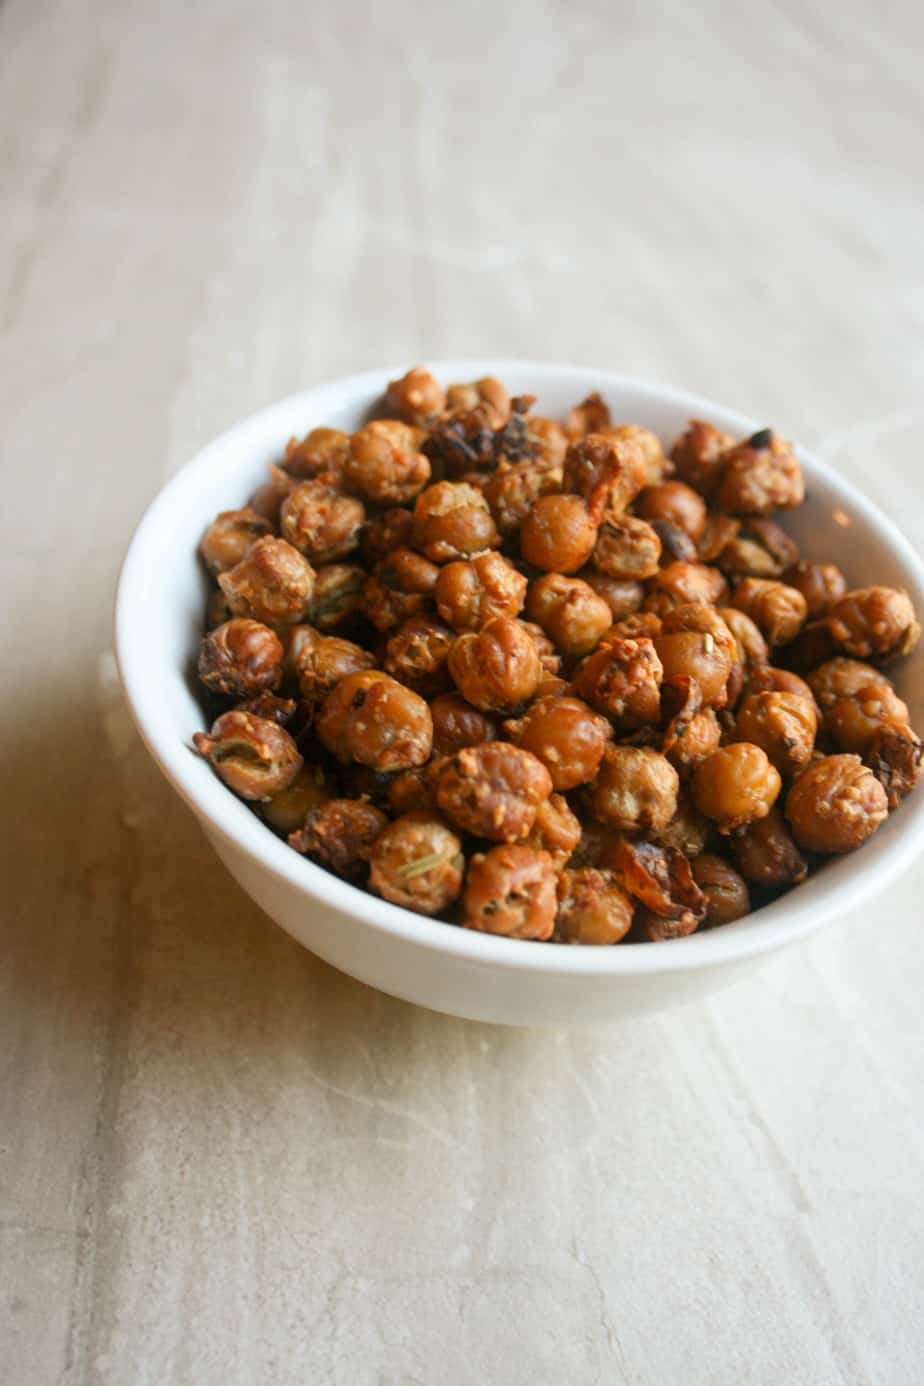 Crunchy roasted chickpeas are the perfect healthy snack or topping for a salad!